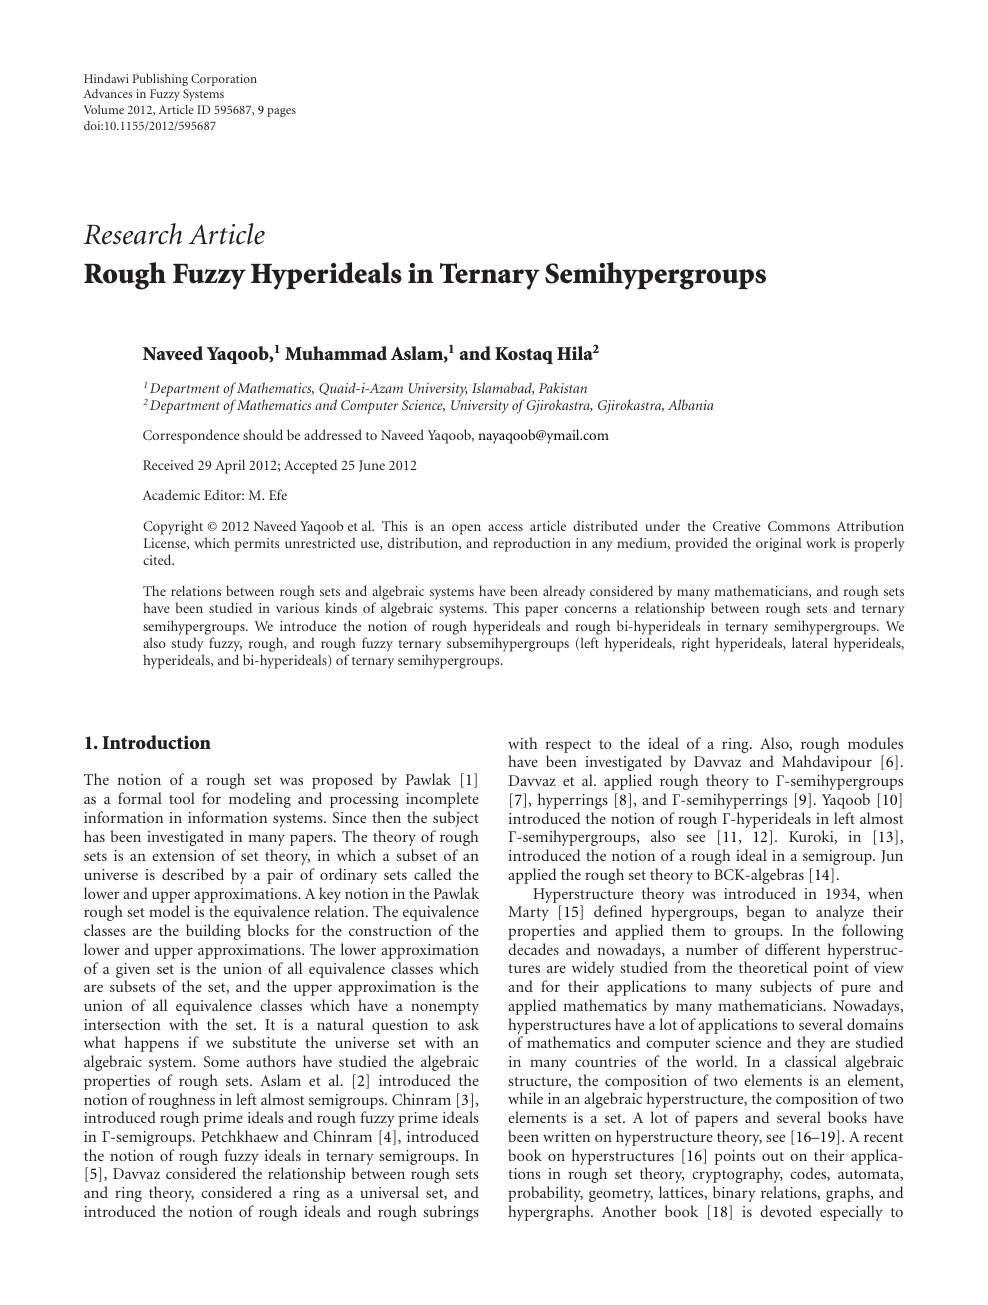 Rough Fuzzy Hyperideals In Ternary Semihypergroups Topic Of Research Paper In Mathematics Download Scholarly Article Pdf And Read For Free On Cyberleninka Open Science Hub